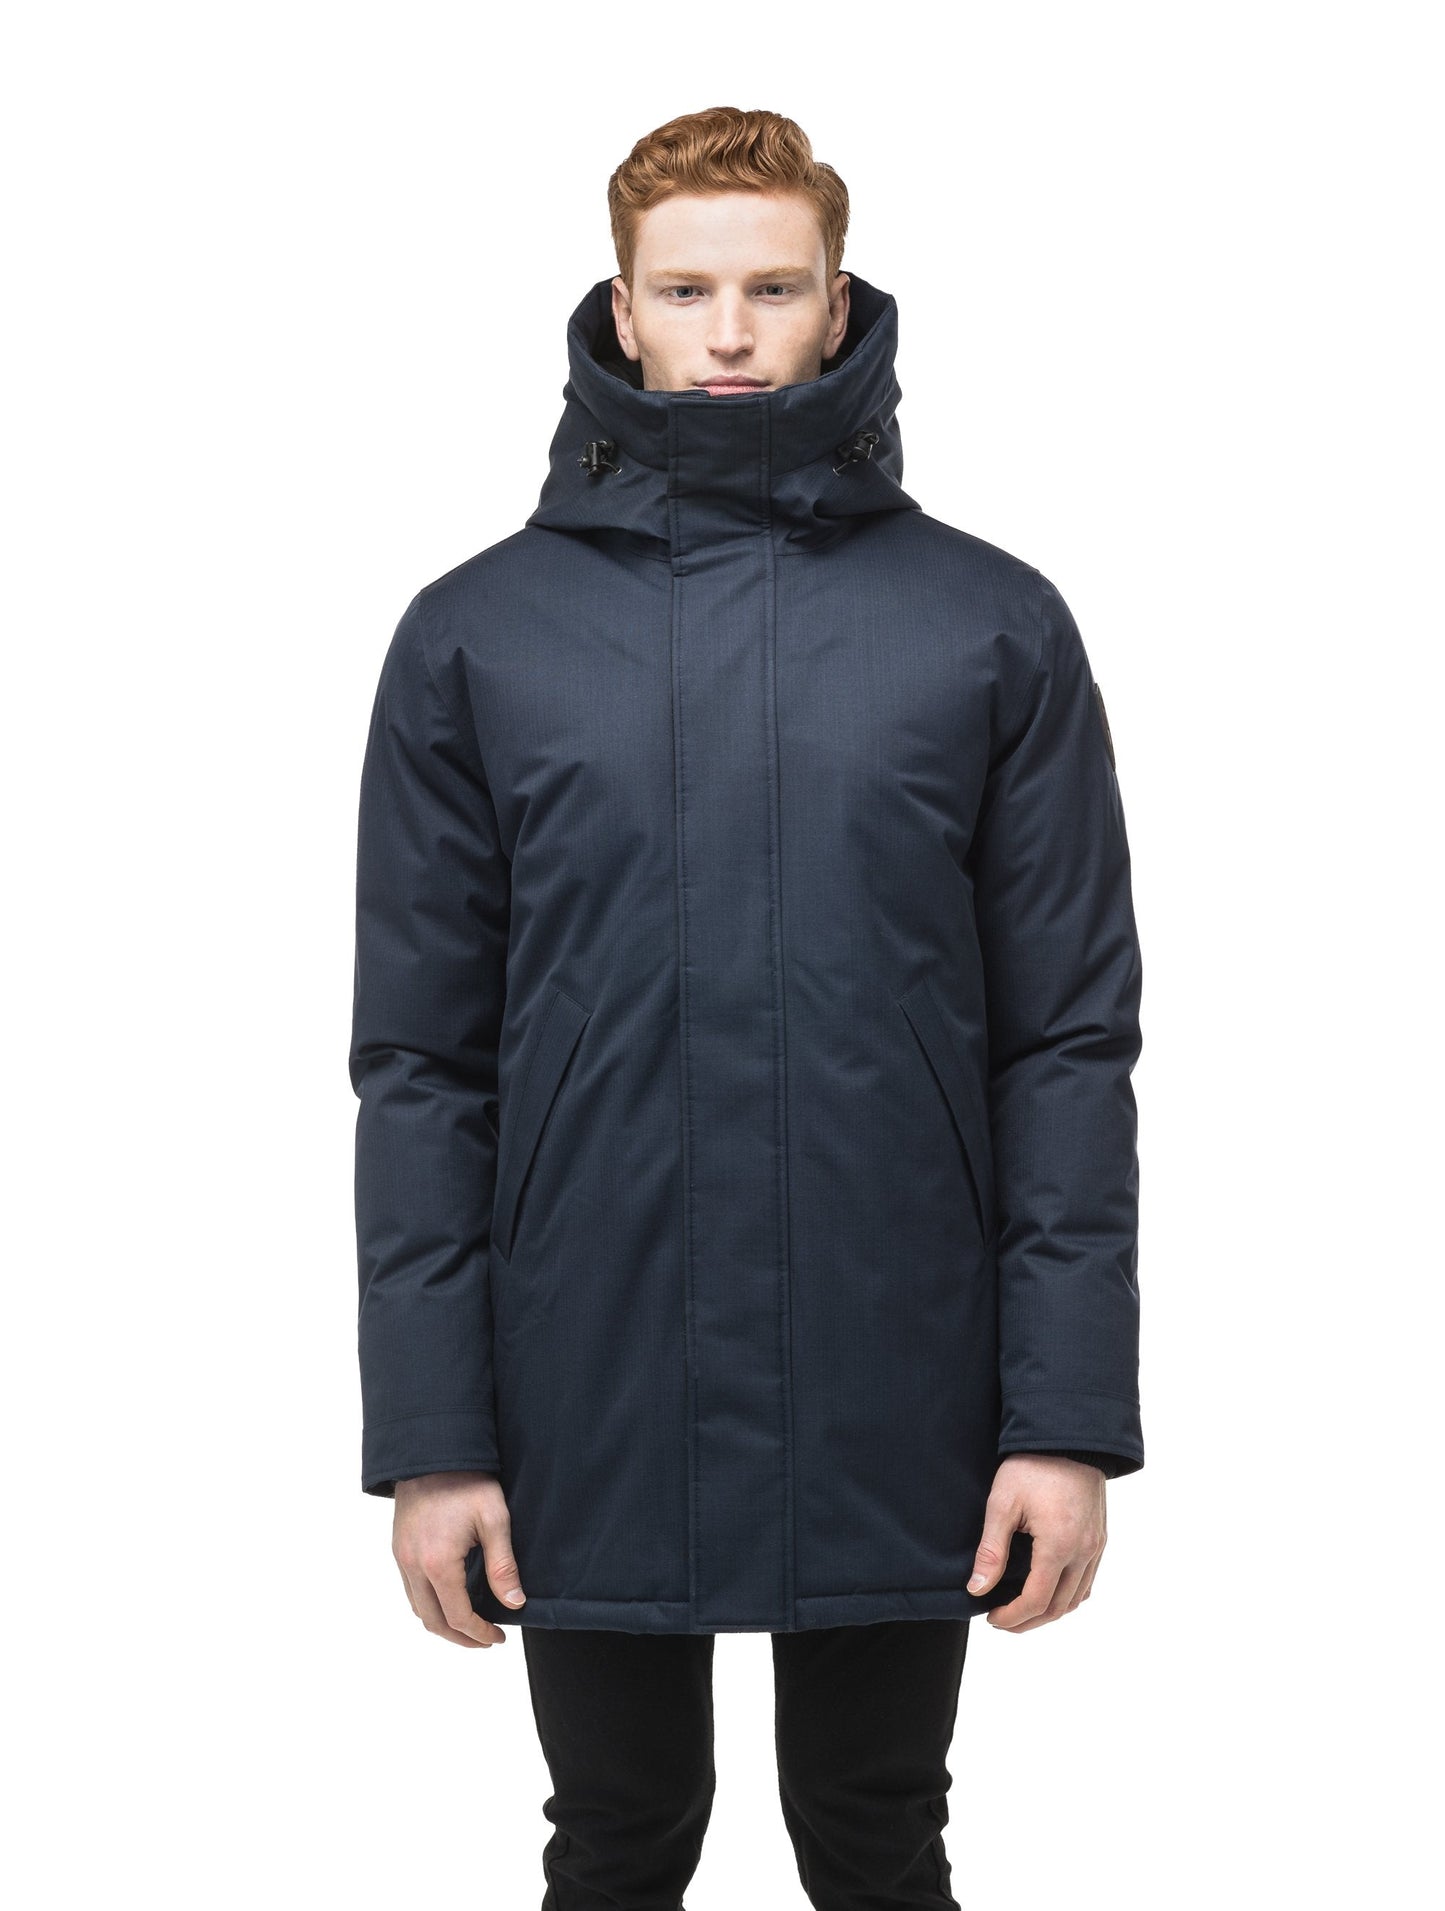 Pierre Men's Jacket in thigh length, Canadian white duck down insulation, non-removable down-filled hood, angled waist pockets, centre-front zipper with wind flap, and elastic ribbed cuffs, in Navy